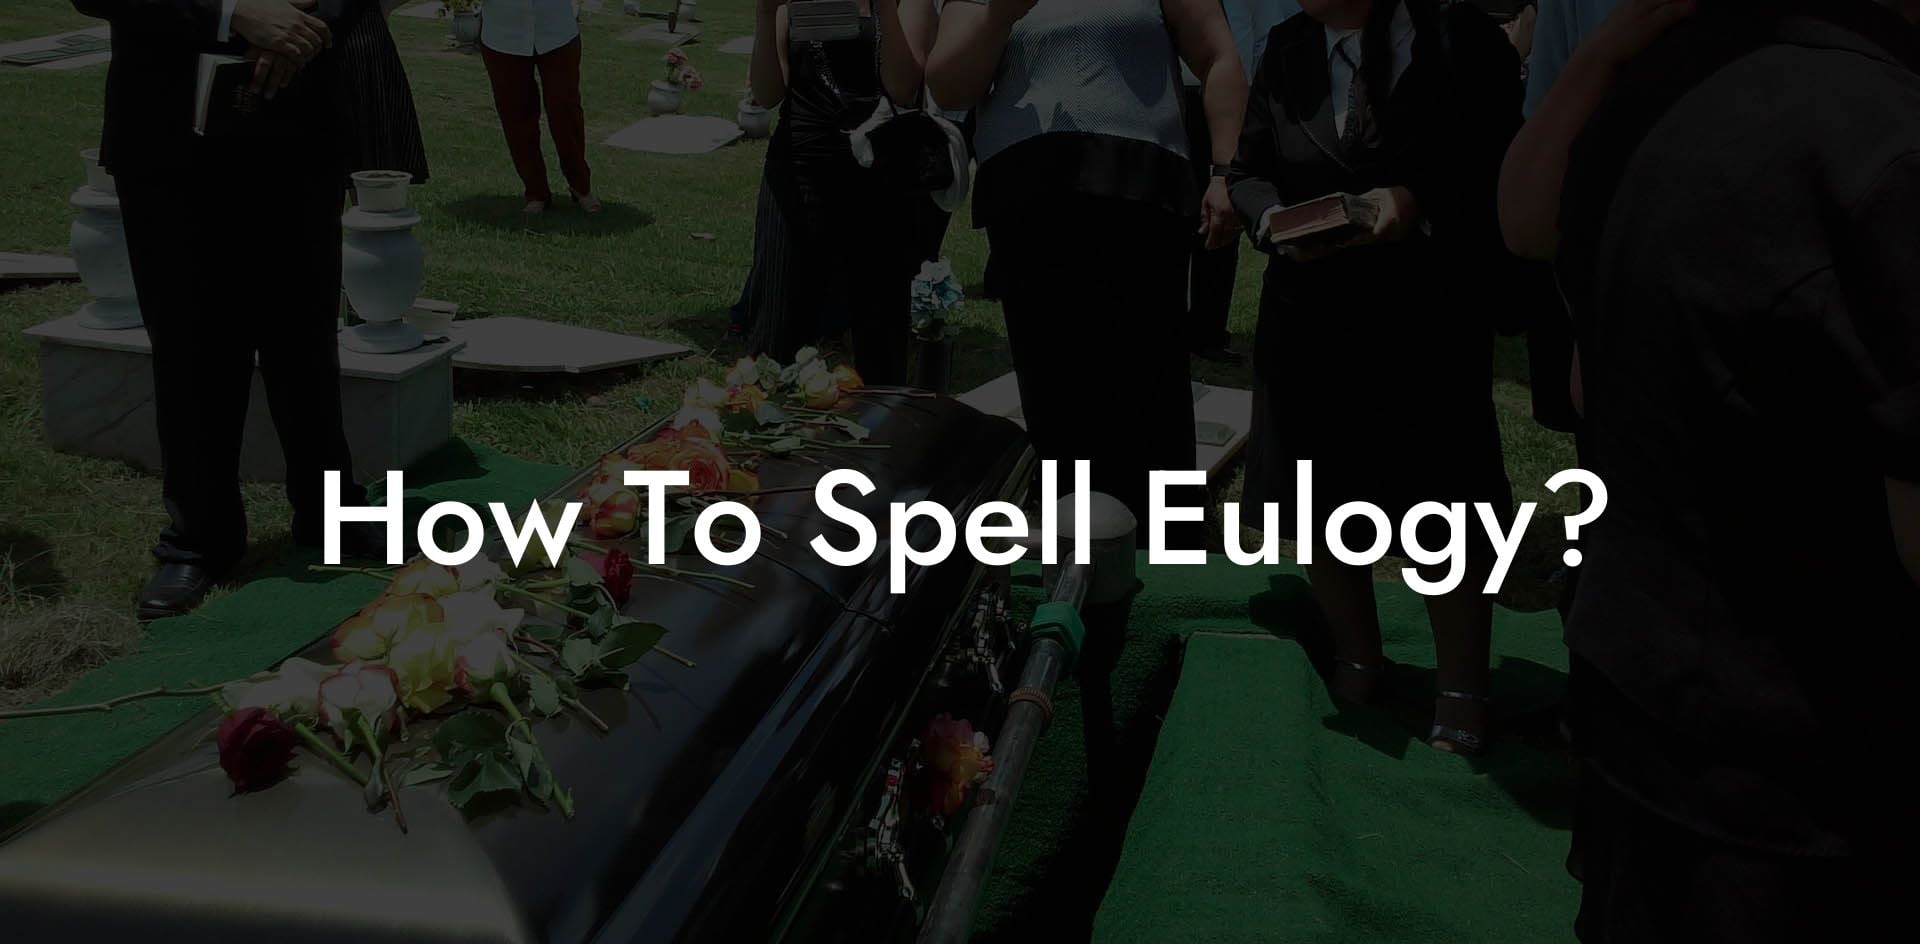 How To Spell Eulogy